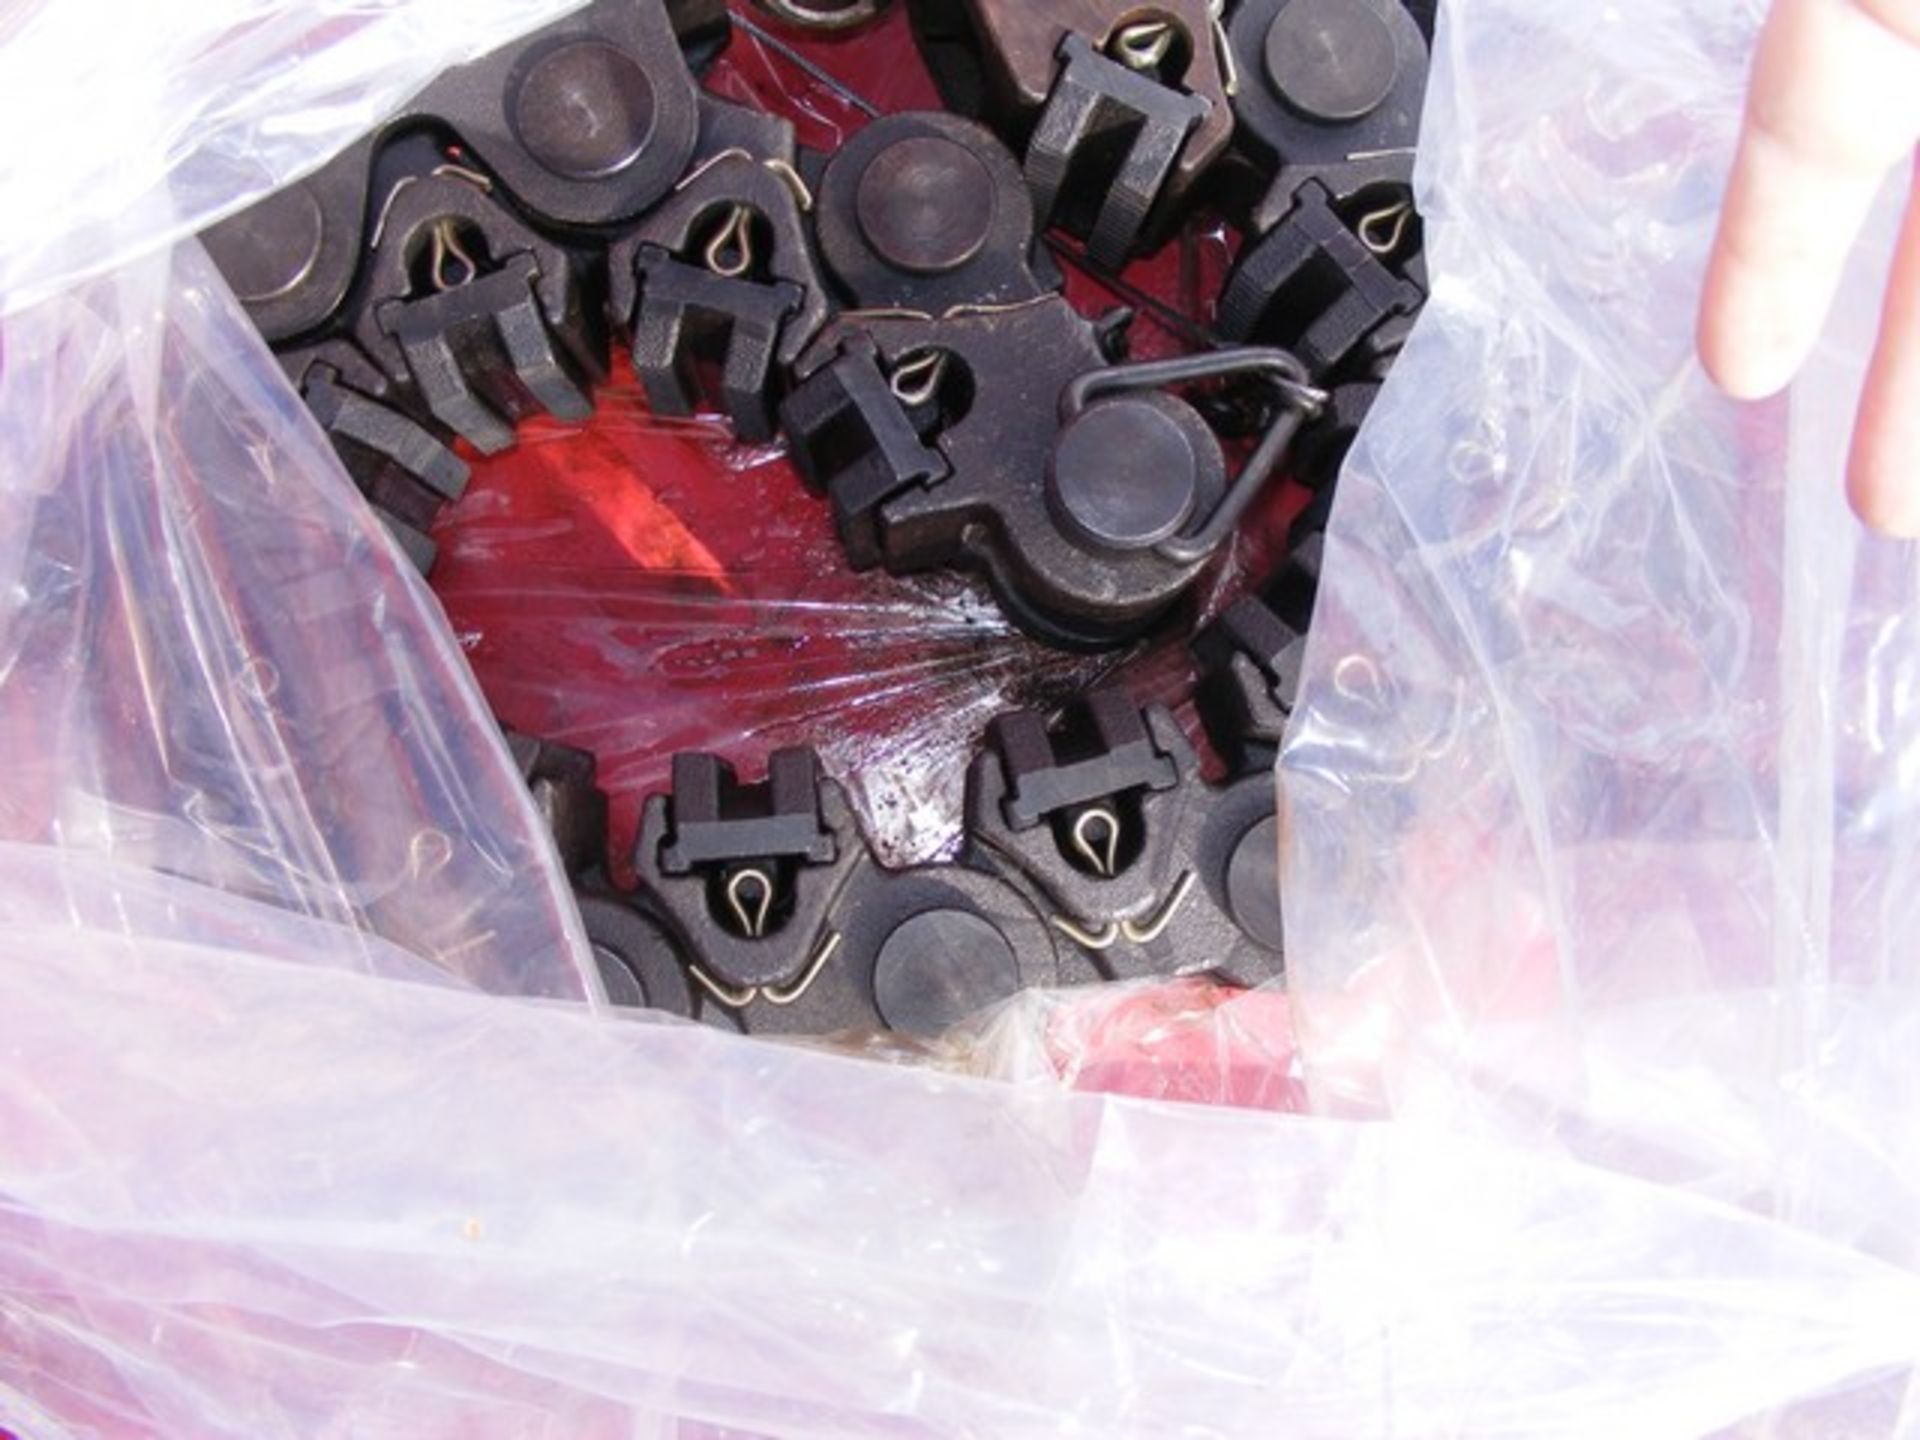 Located in YARD 1 - Midland, TX (6033) (2) TYPE "C" SAFETY CLAMPS, 12 SEG 8-1/2" - 9-5/8" W/ BOX &